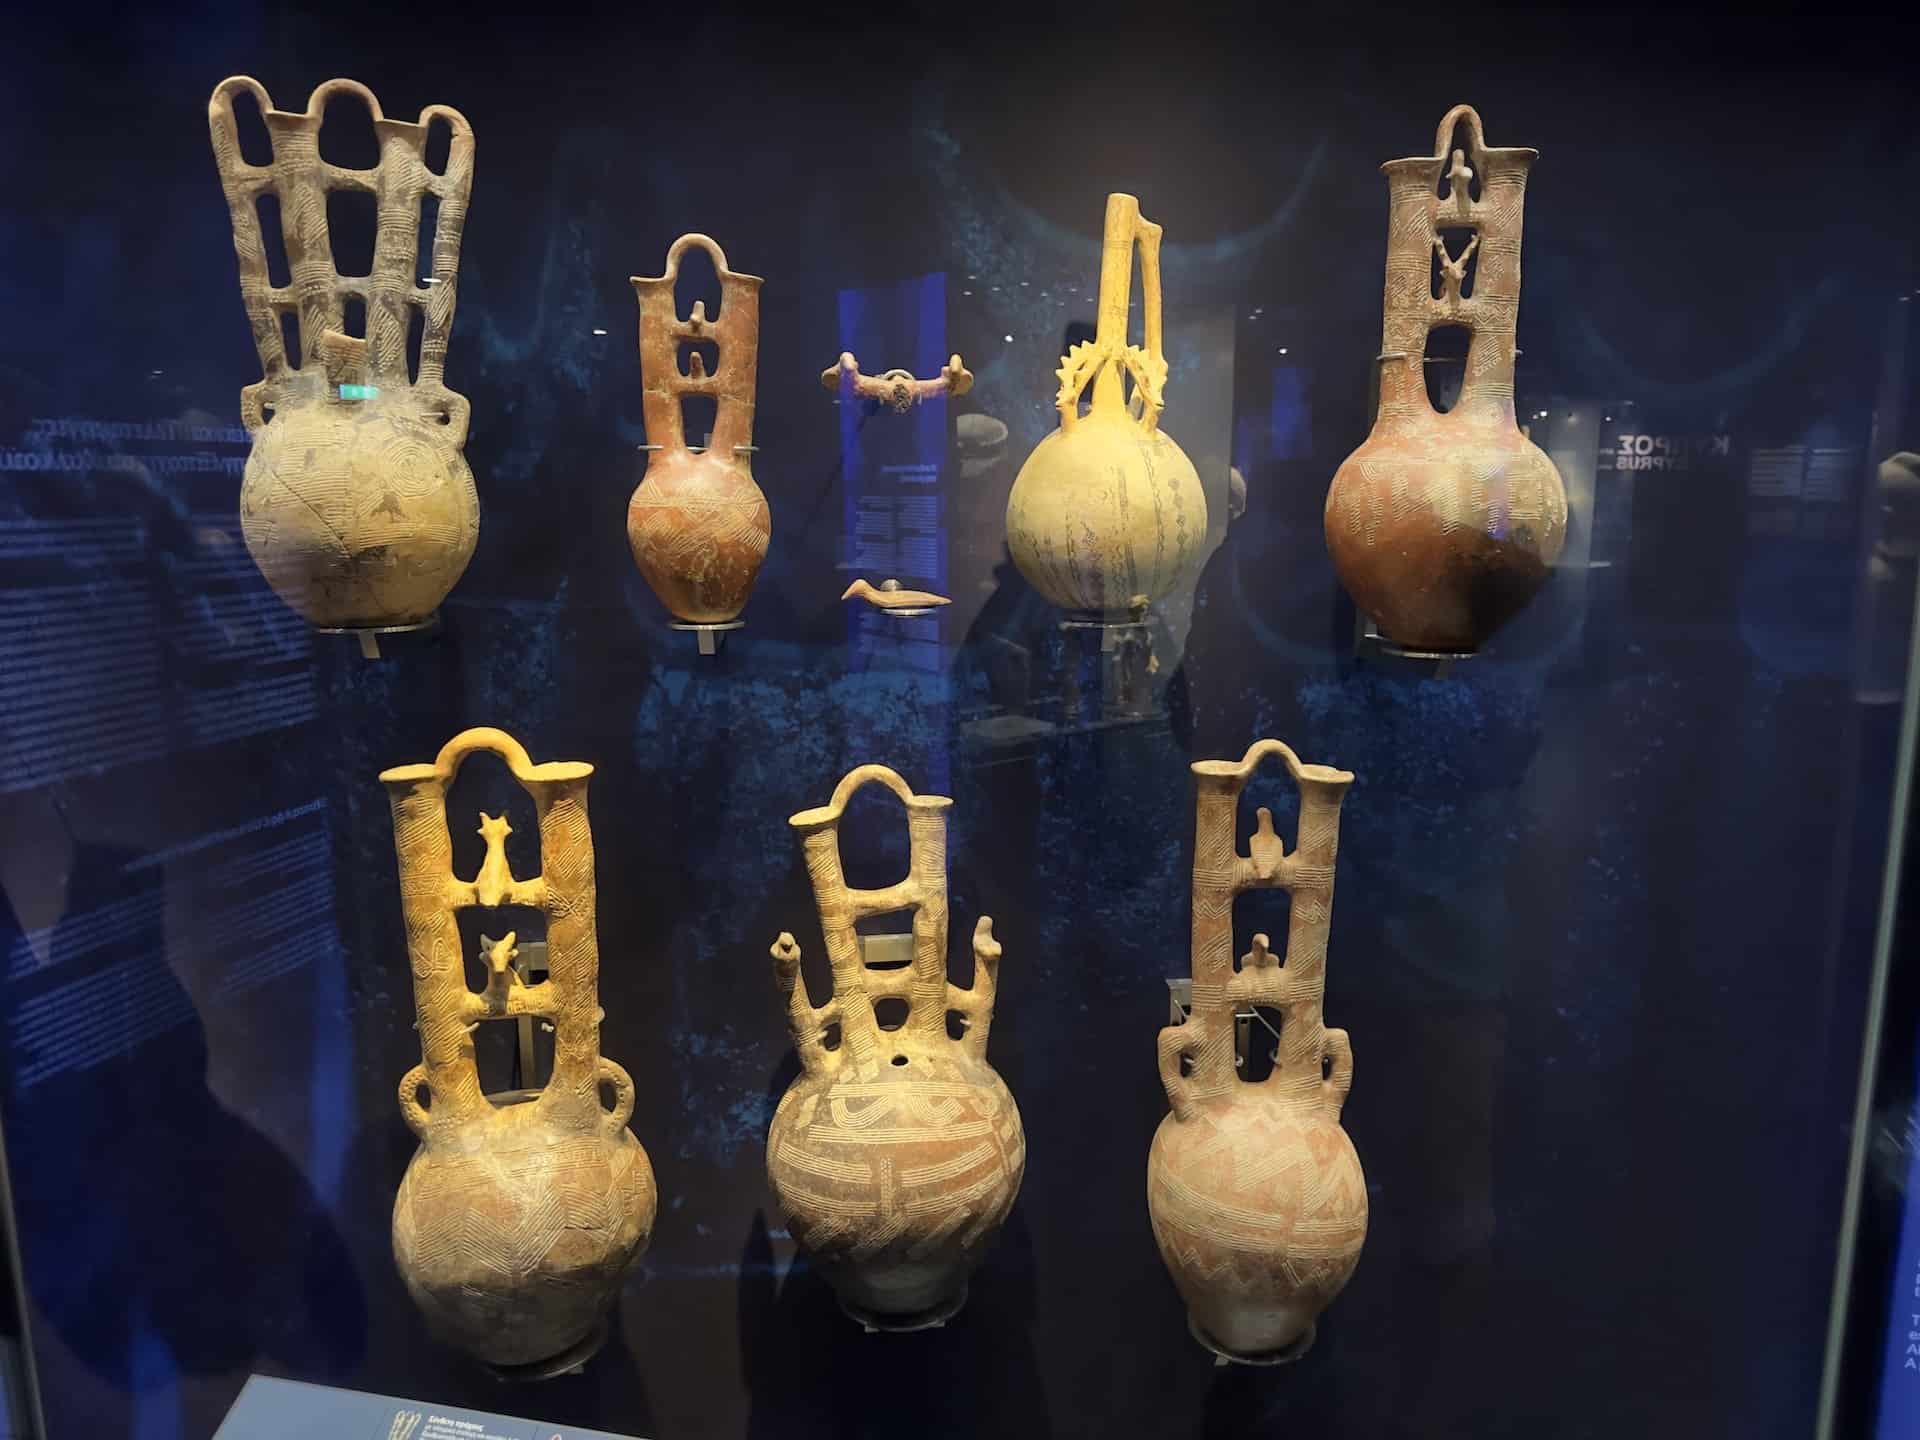 Twin-necked jugs in Cypriot Culture at the Museum of Cycladic Art in Athens, Greece